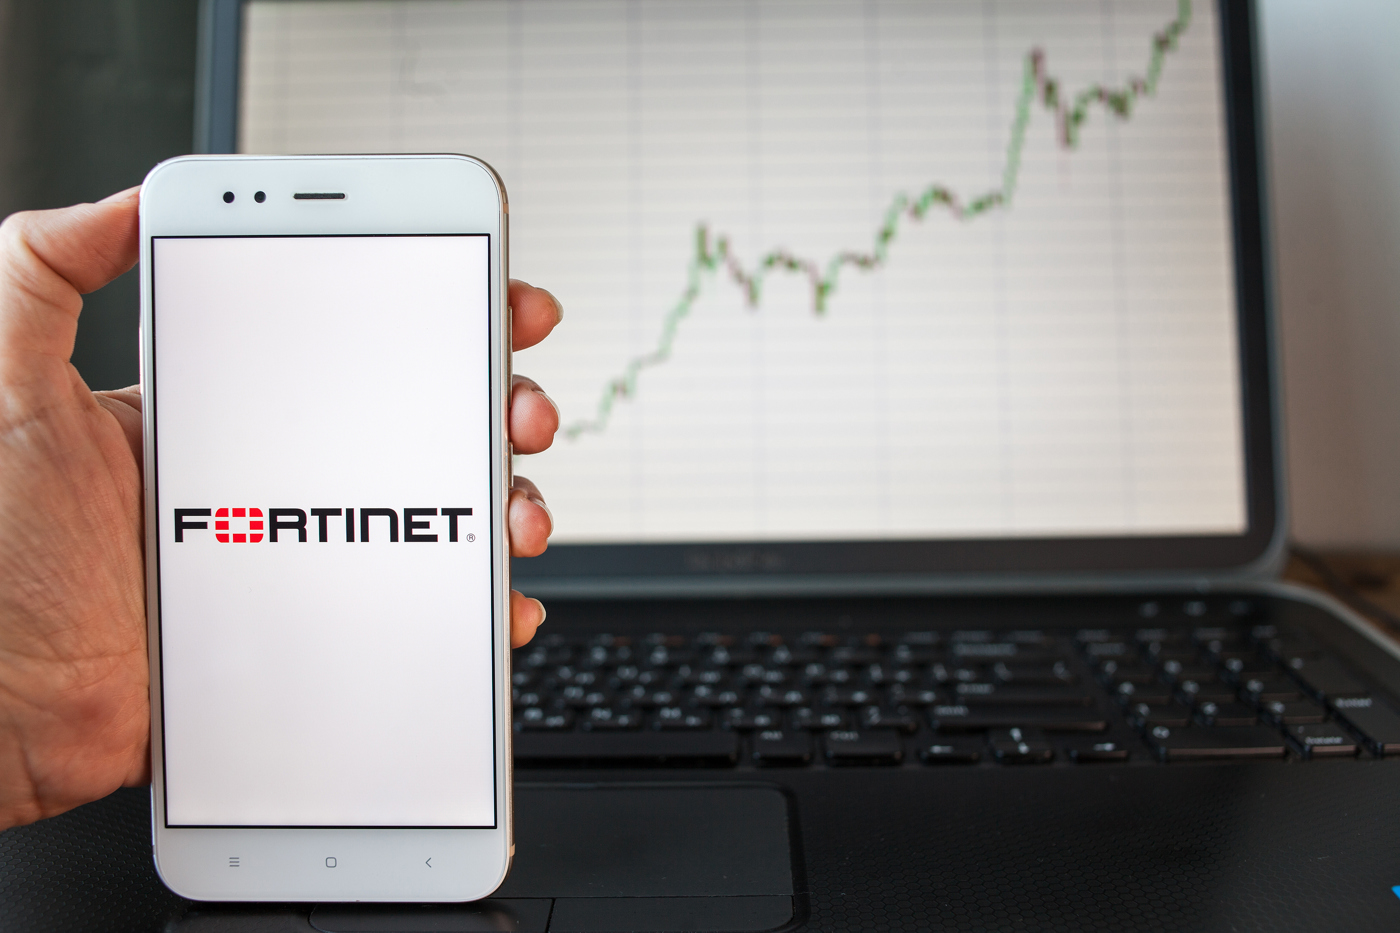 Fortinet stock, FTNT stock, cybersecurity stocks